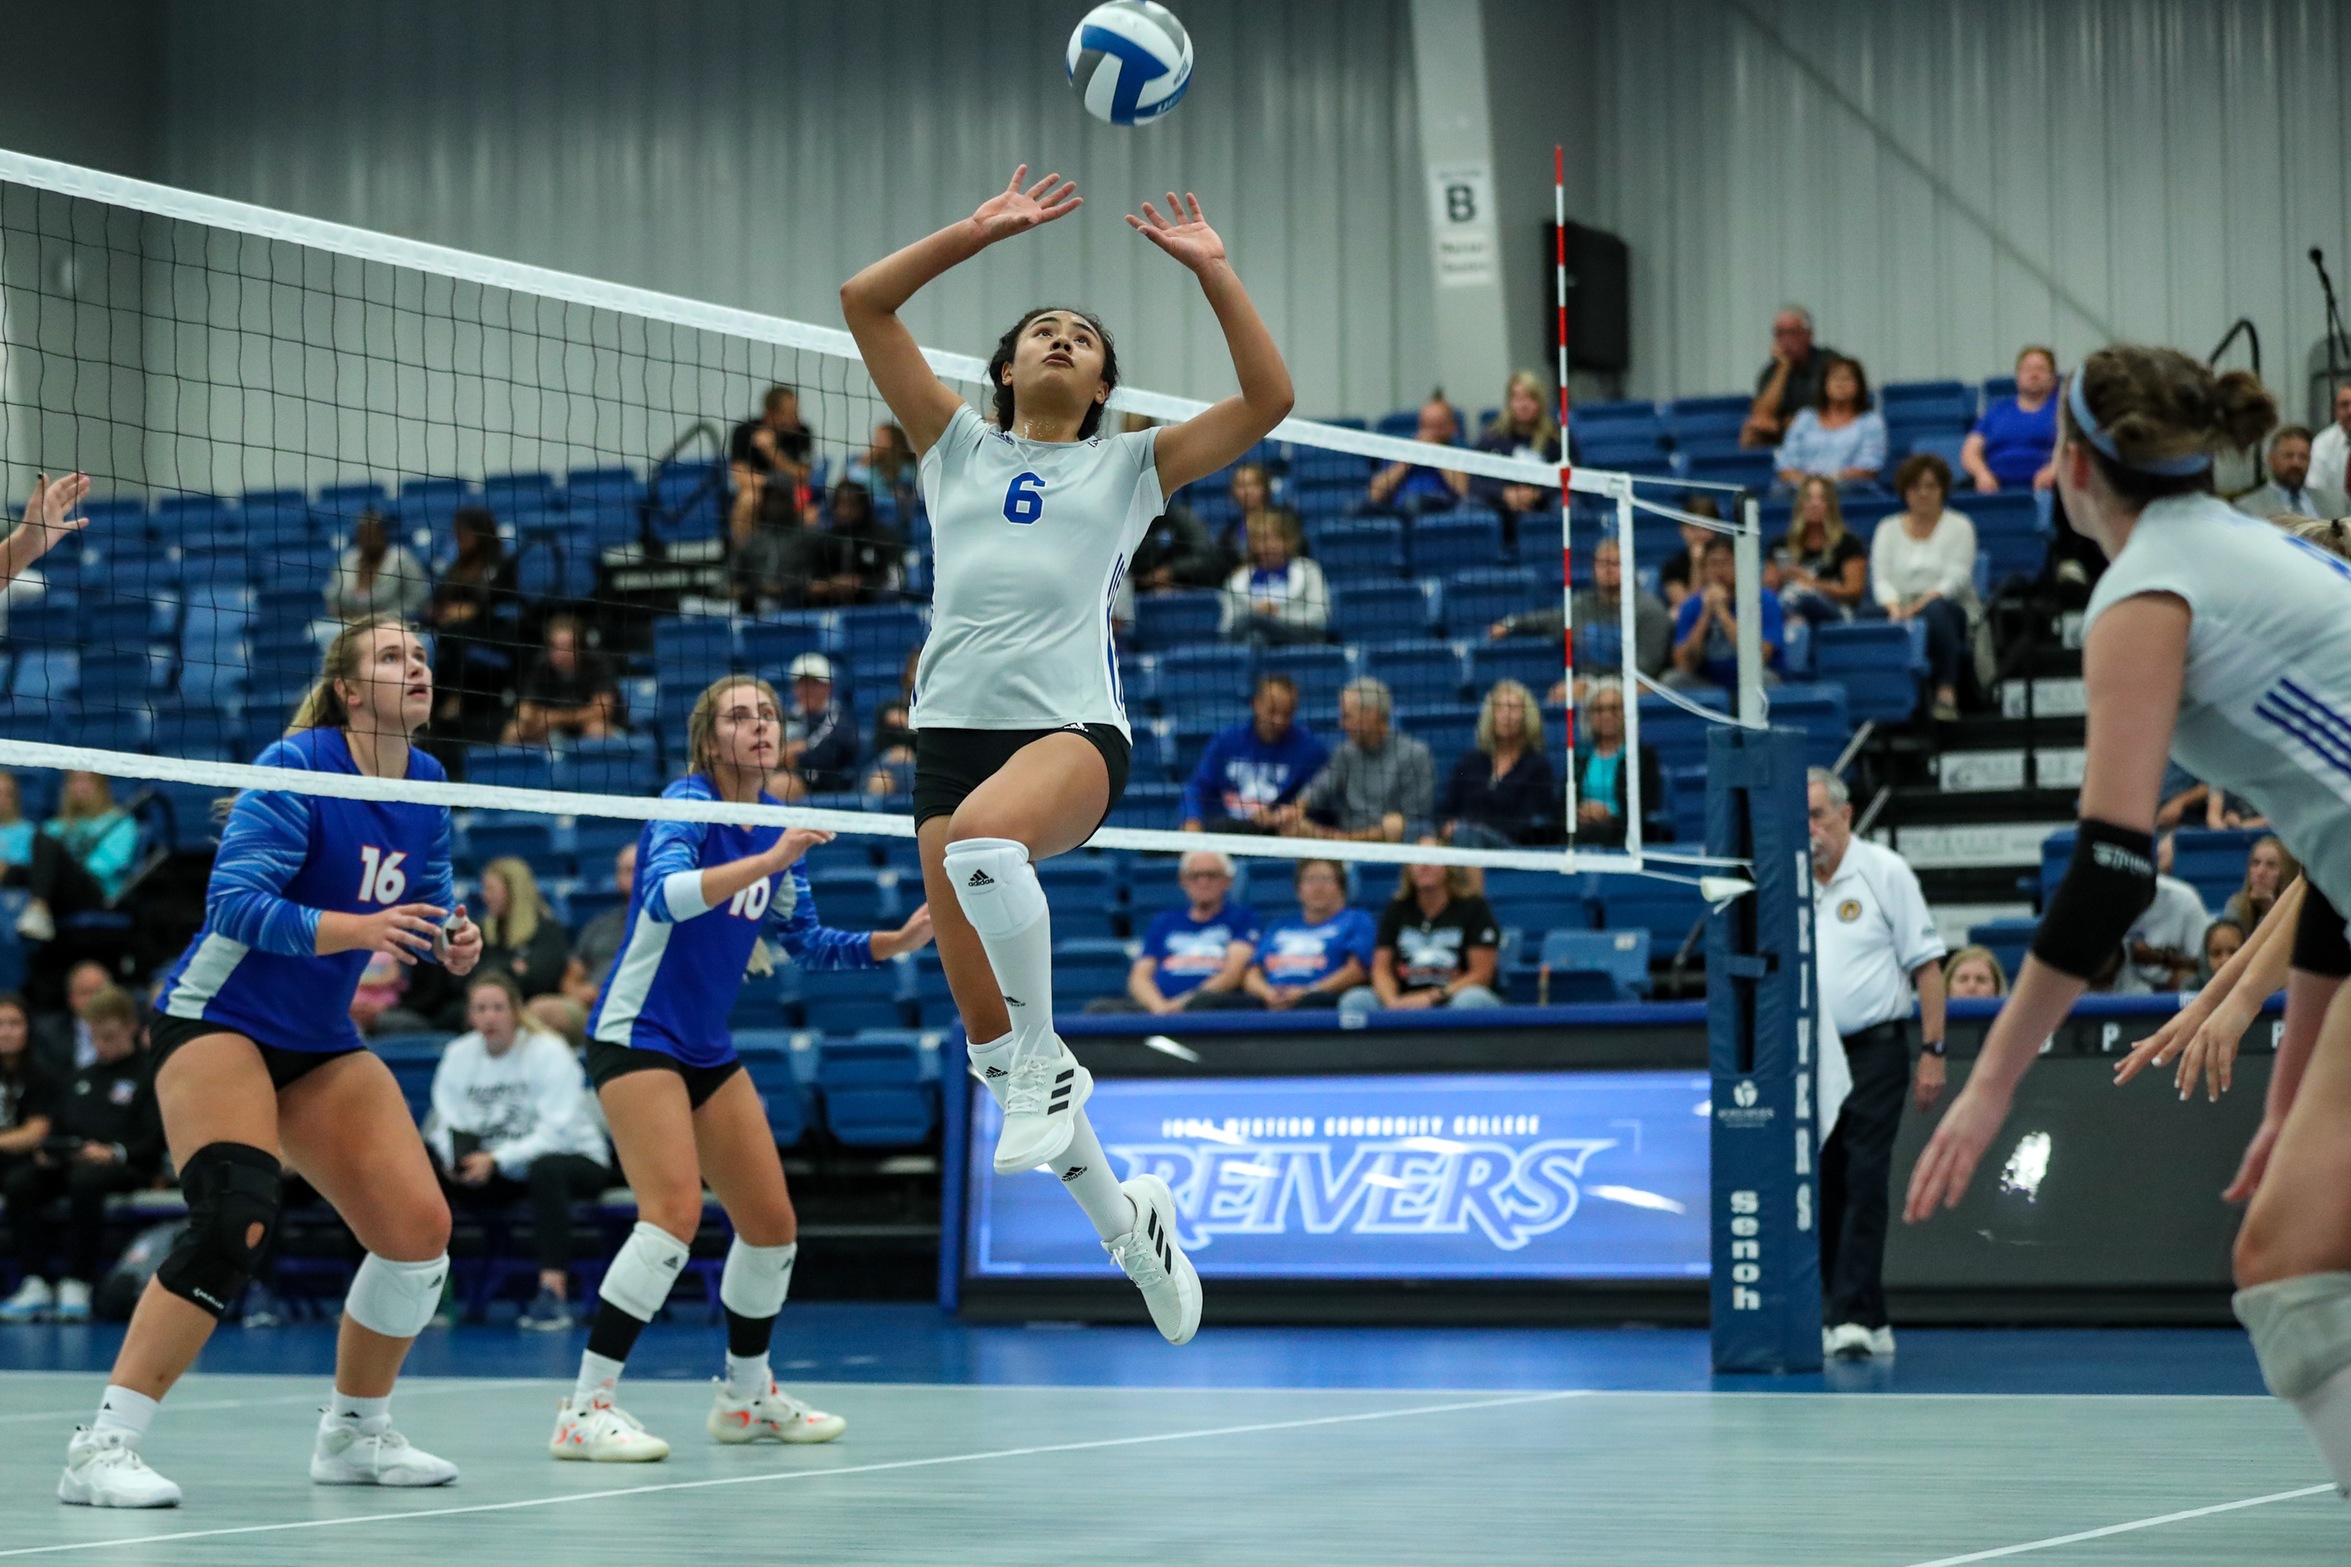 #2 Reivers volleyball defeat #11 Warriors